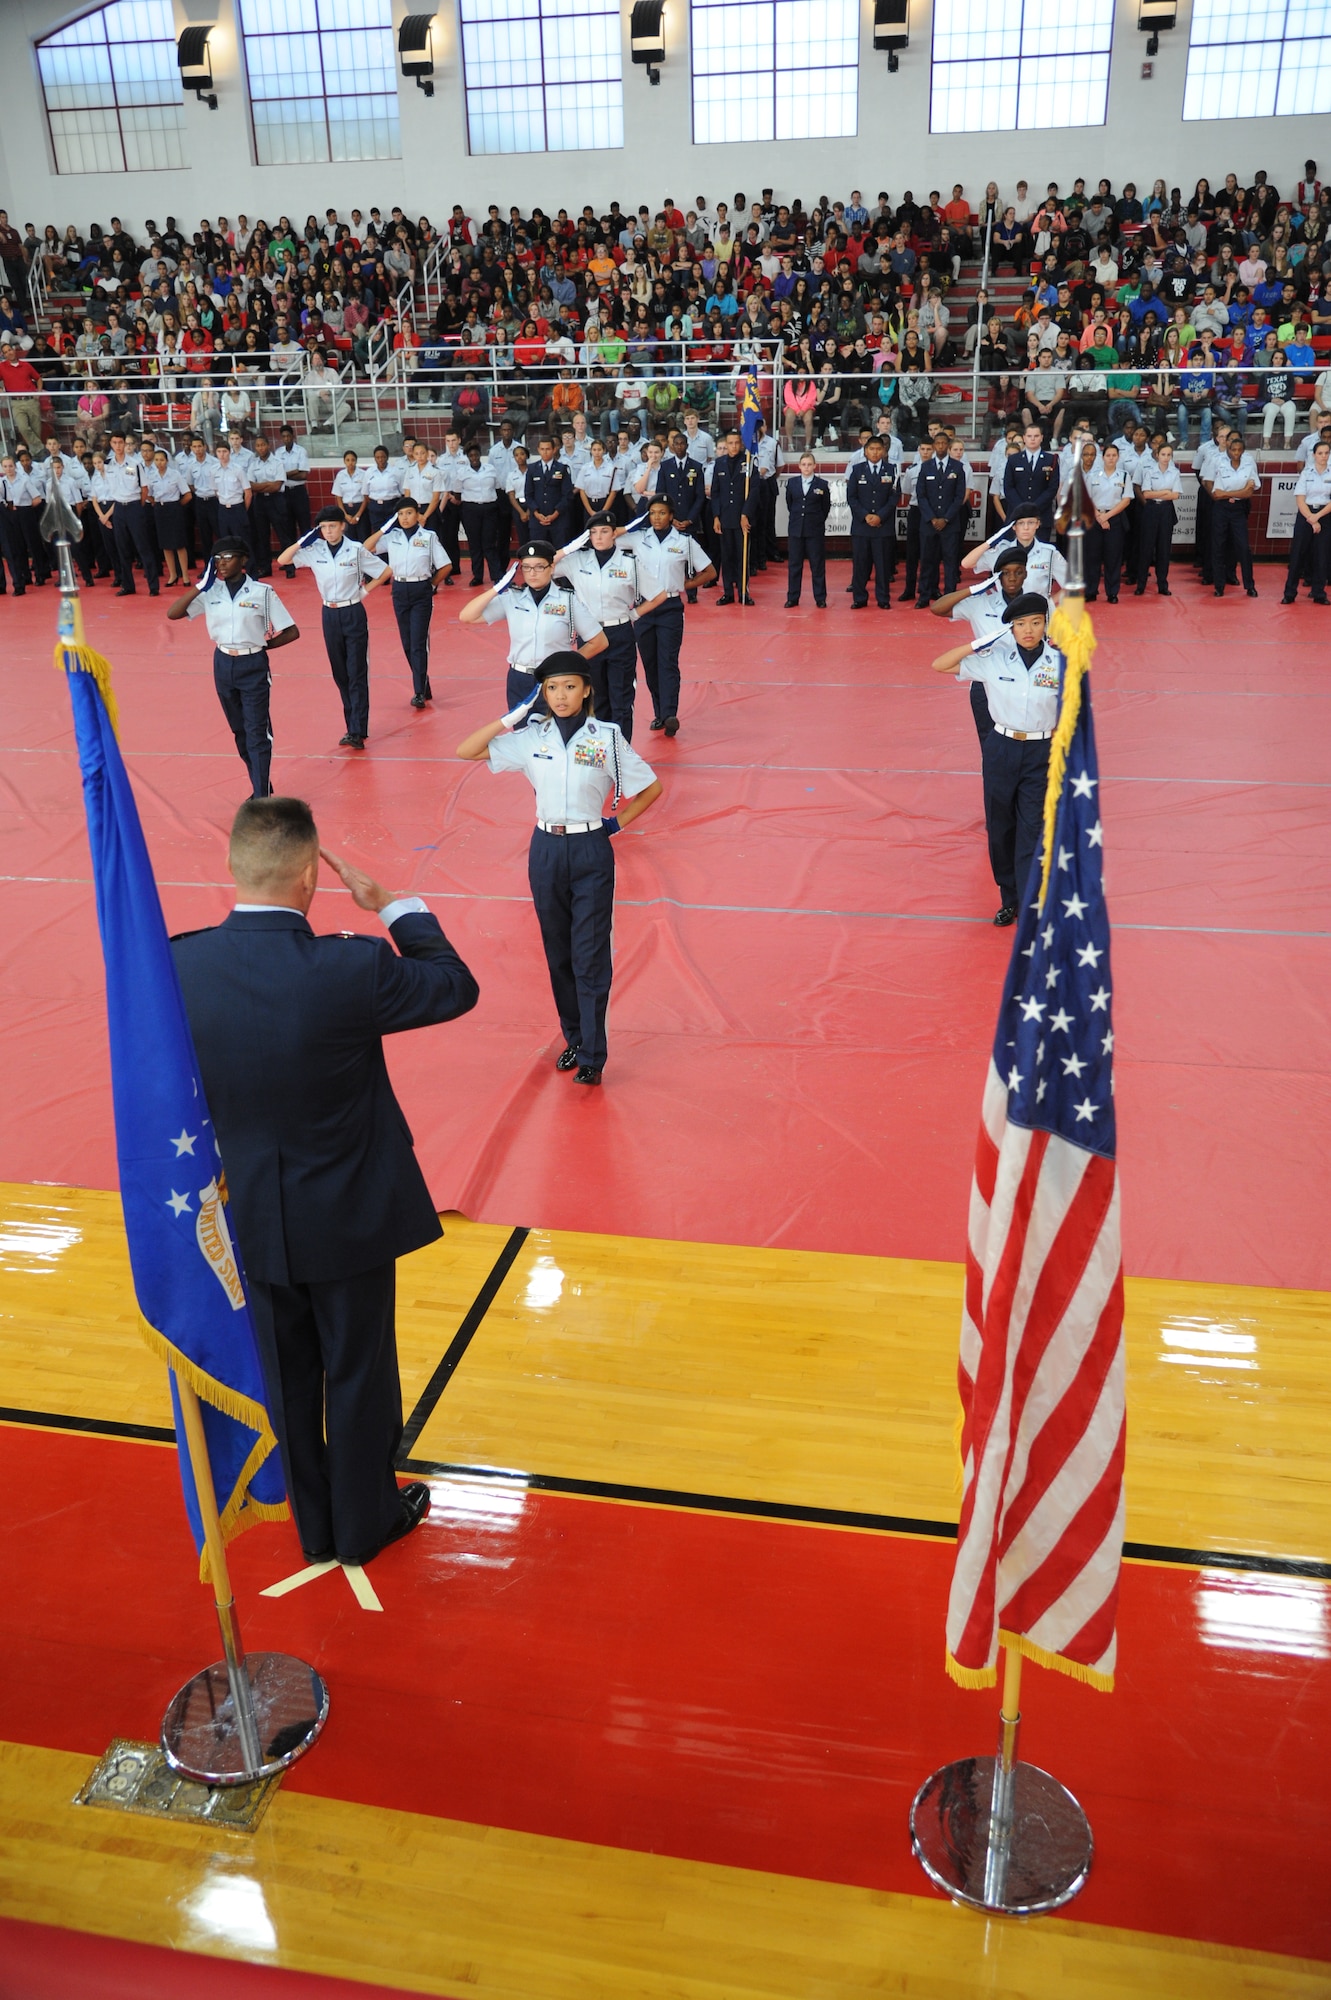 Brig. Gen. Higby, 81st Training Wing commander, returns a salute to members of the MS-781st Unarmed Exhibition Drill team as they prepare to perform their routine during the Biloxi High School Cadet Oath ceremony Oct. 30, 2014, at the Biloxi High School Sports Arena.  Higby delivered the oath to more than 100 Junior ROTC cadets. (U.S. Air Force photo by Kemberly Groue)